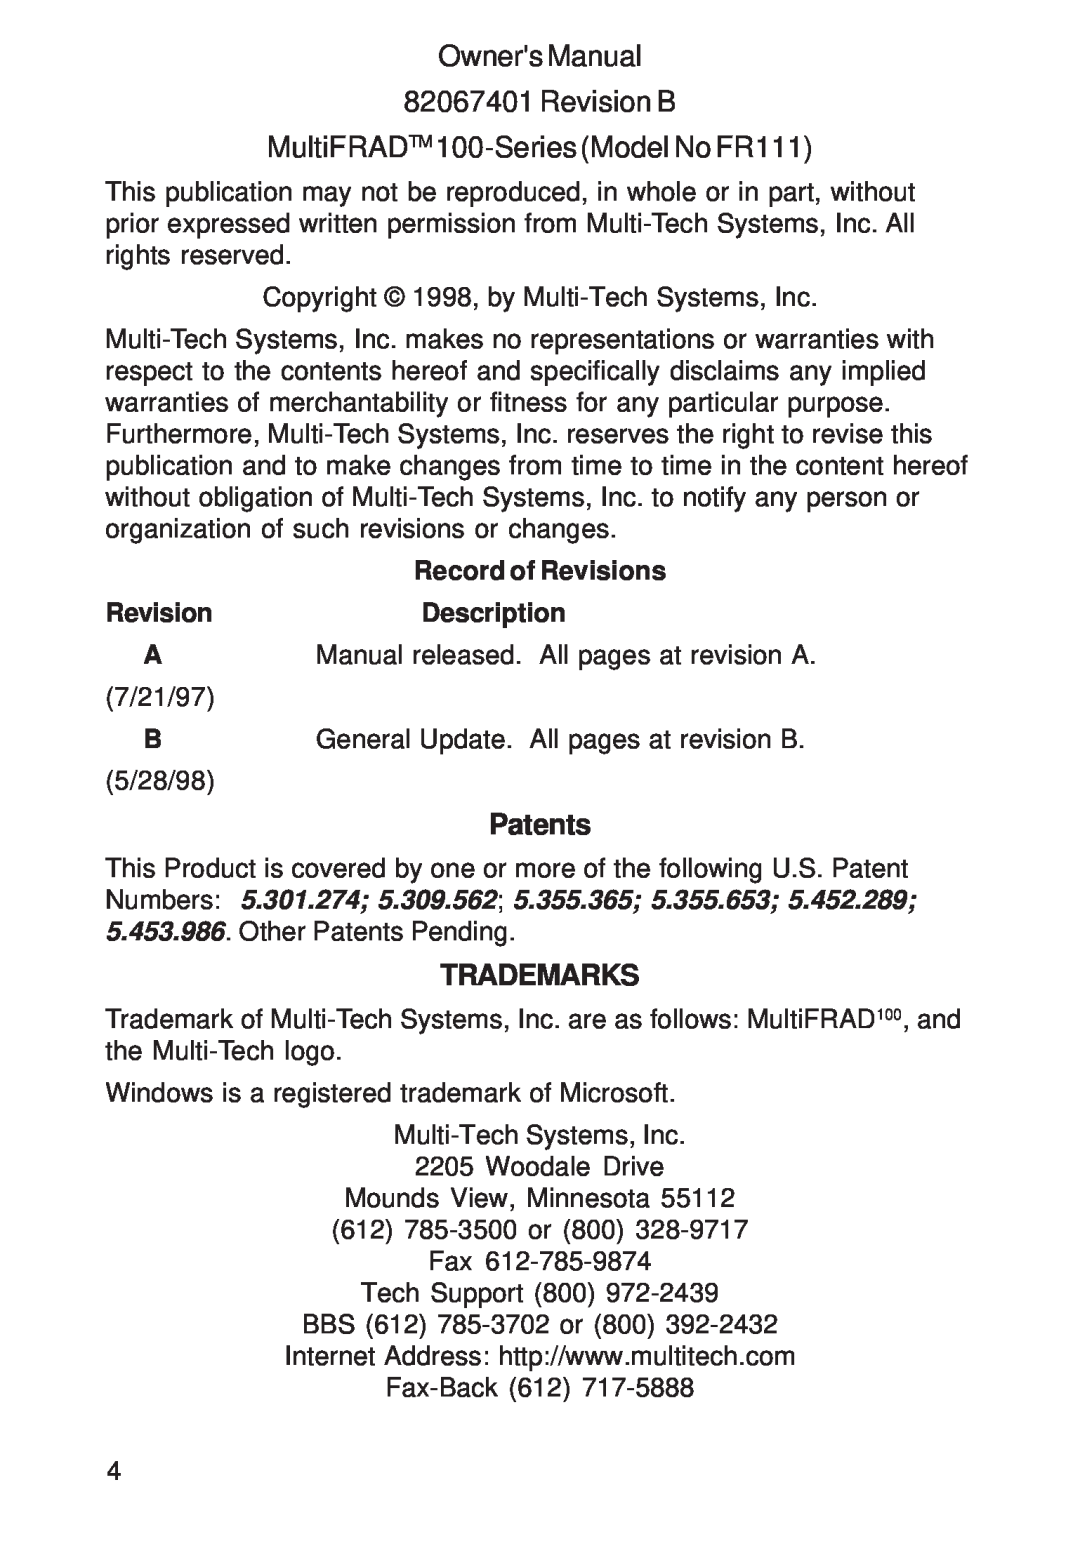 Multi-Tech Systems Owners Manual 82067401 Revision B, MultiFRADTM 100-Series Model No FR111, Patents, Trademarks 